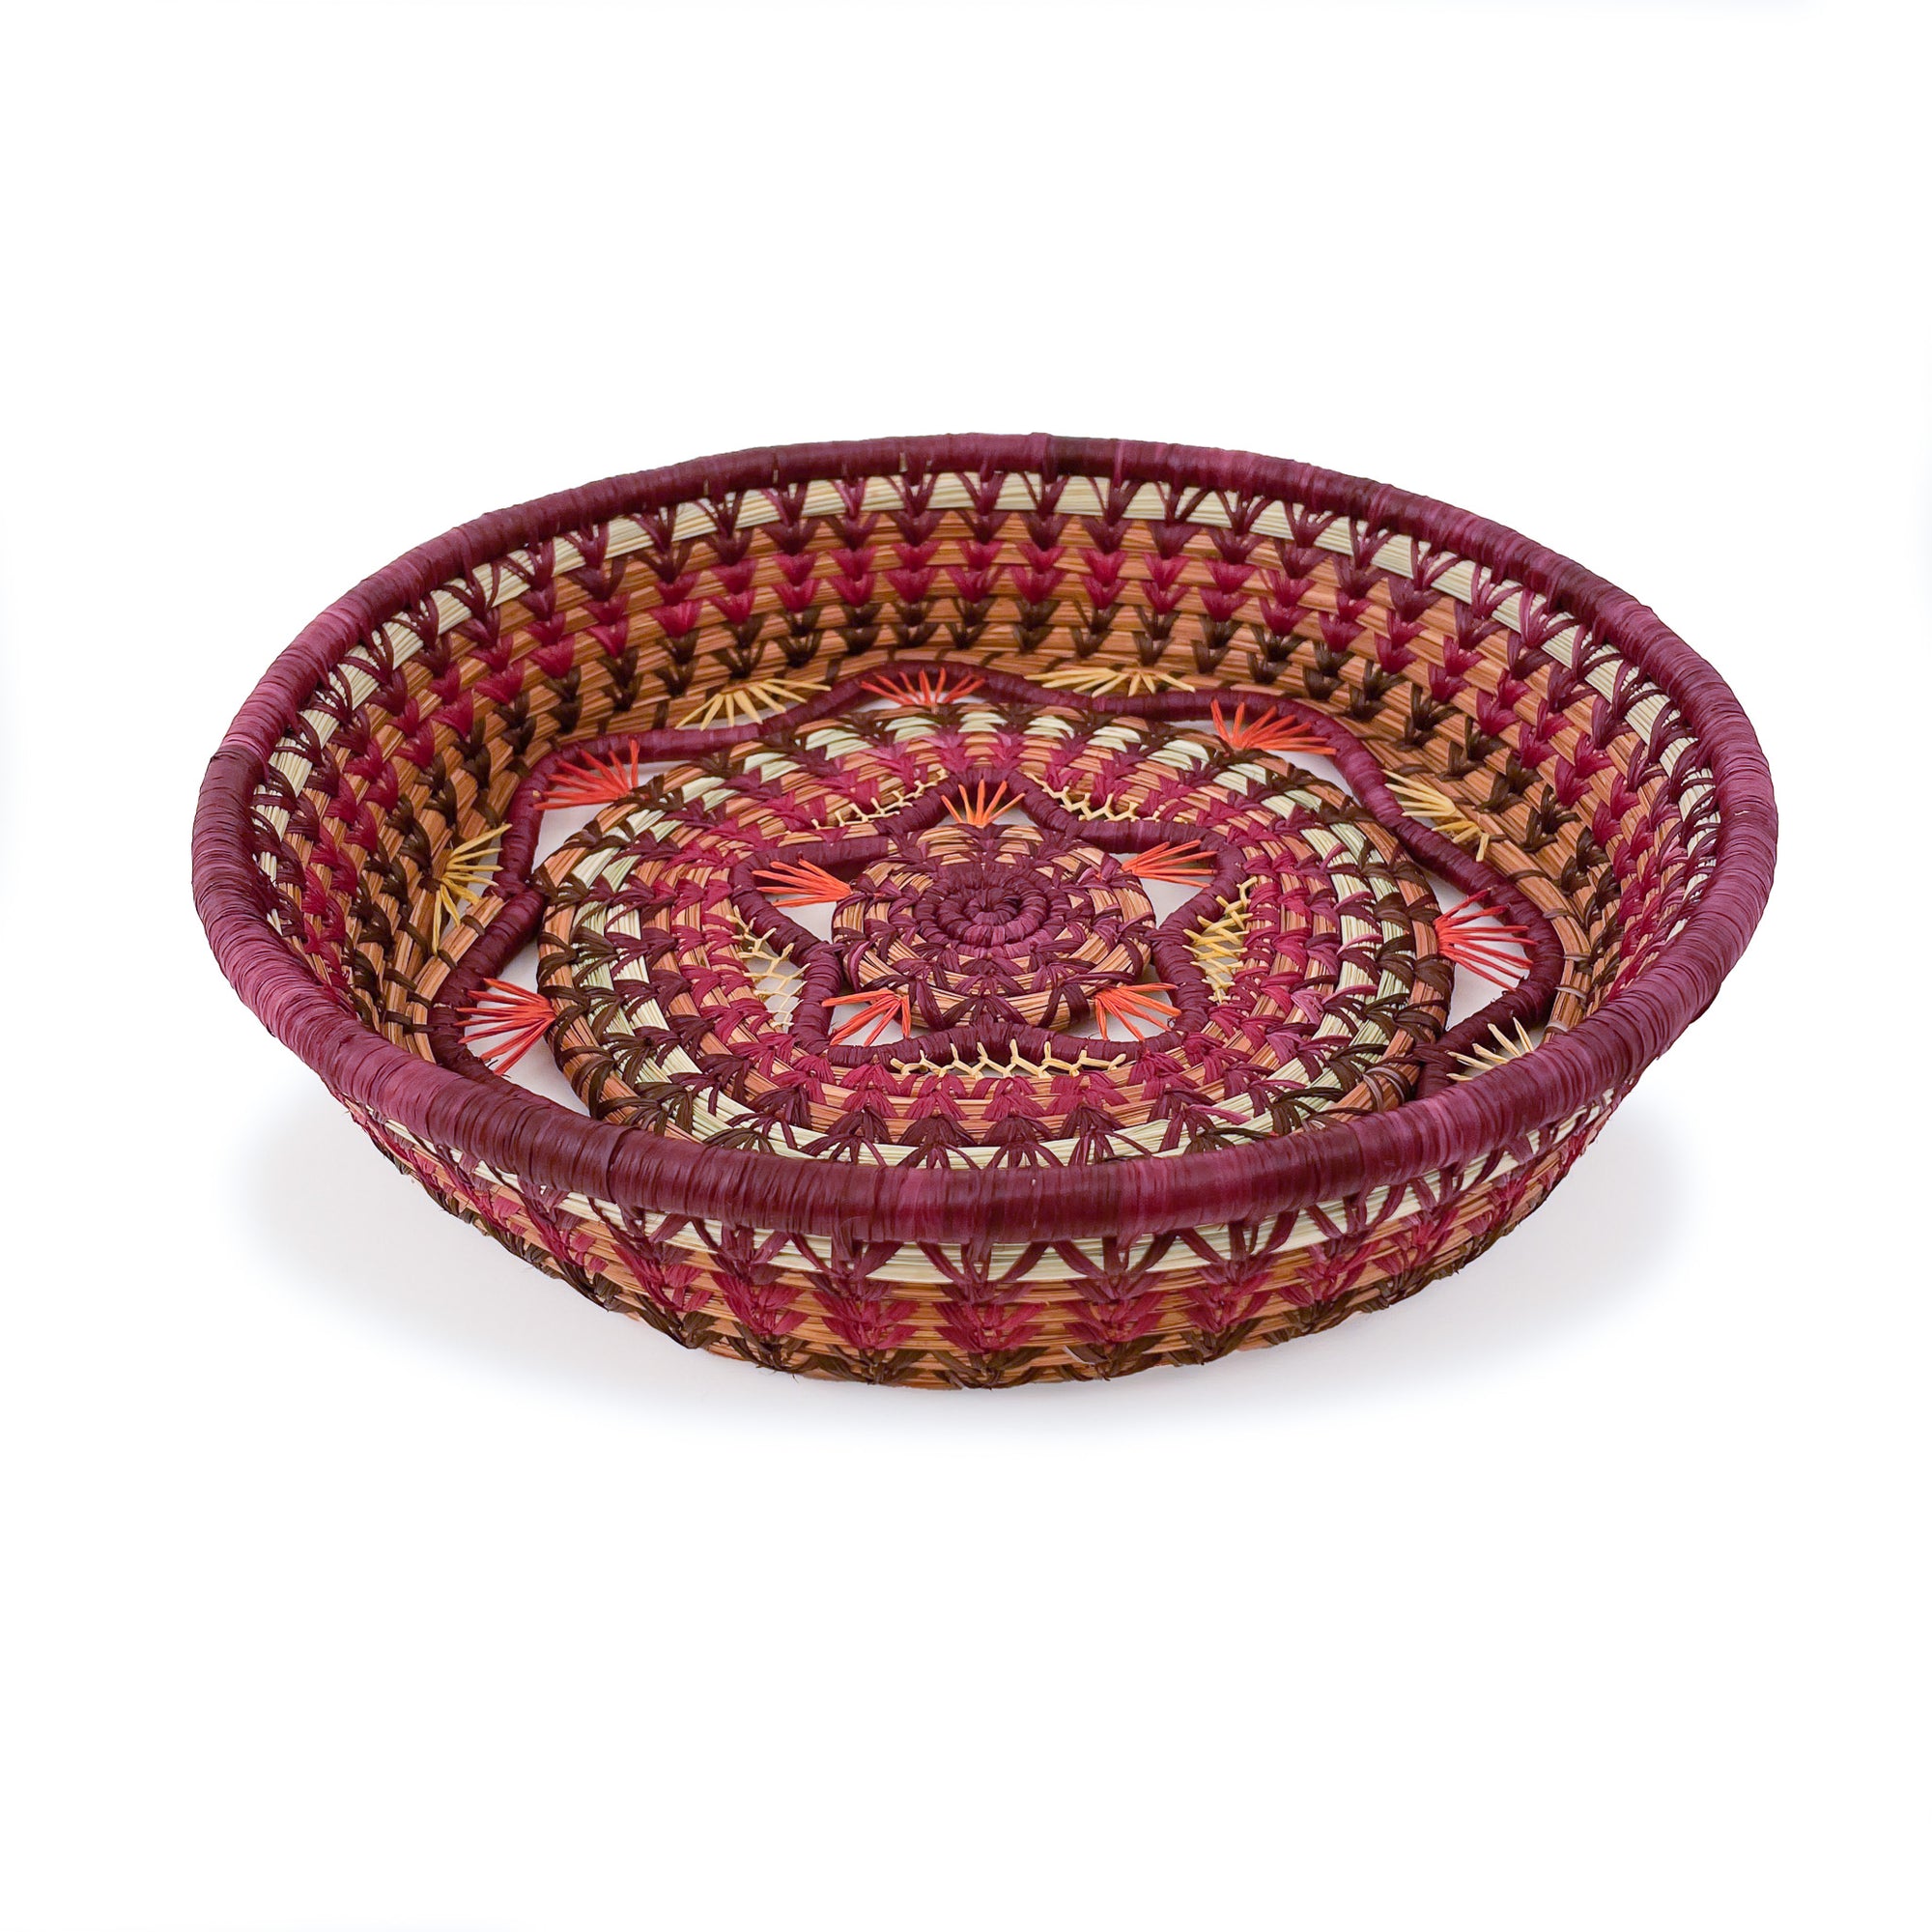 Front facing view of Rosenda Basket in Wine, featuring a wine-color rim, scallop detail, and star-shaped accent in center, with raffia detailing